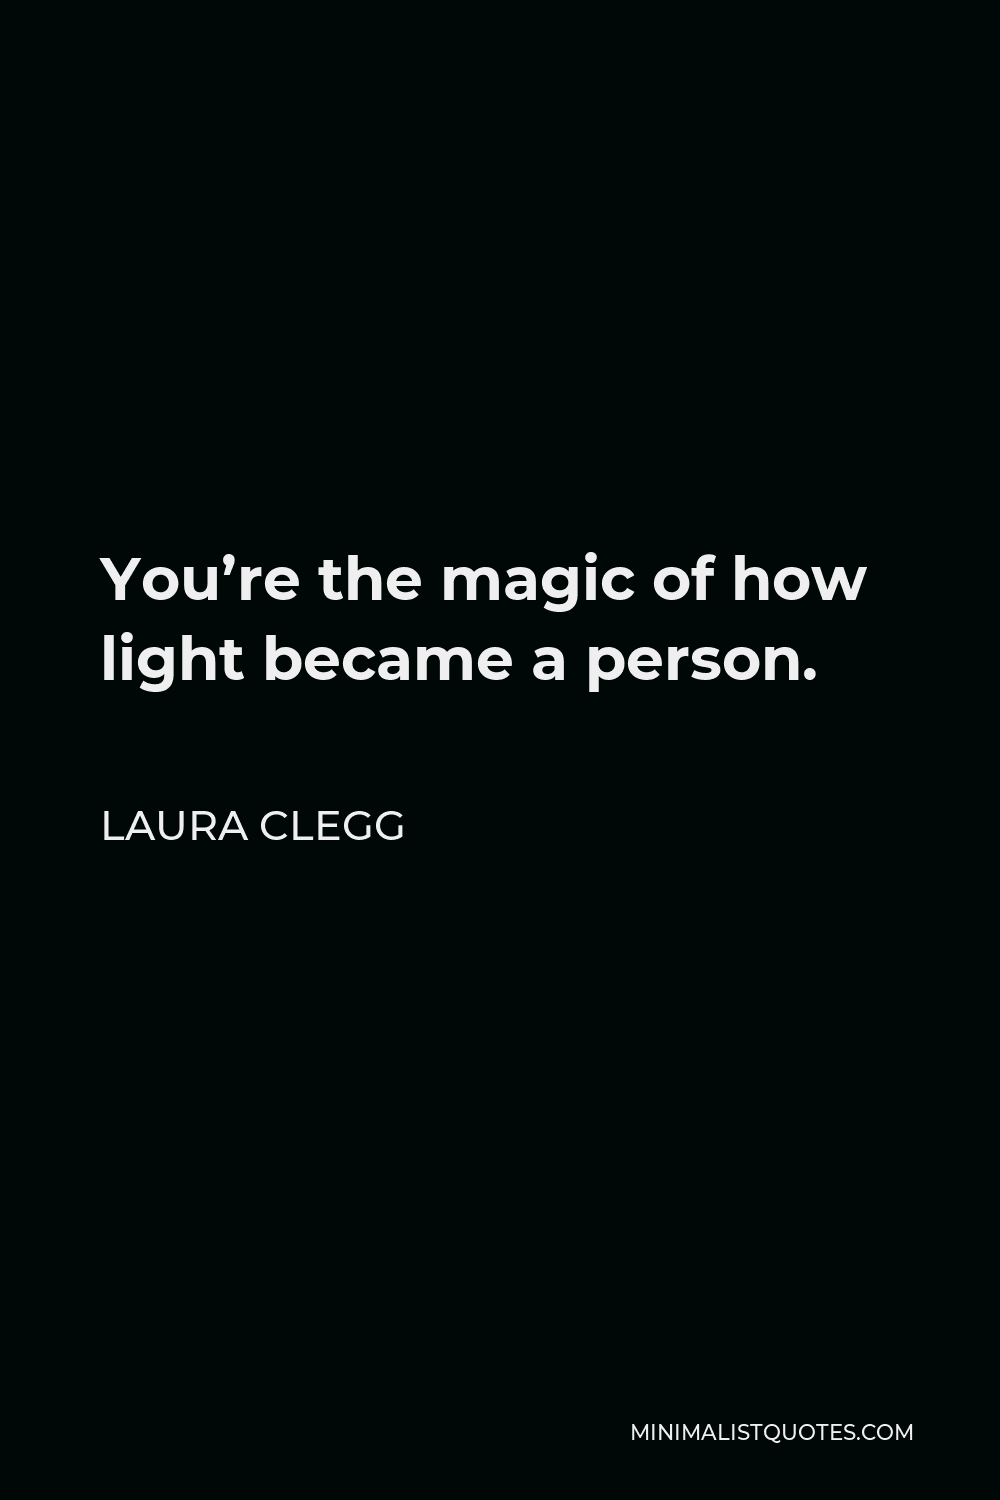 Laura Clegg Quote - You’re the magic of how light became a person.